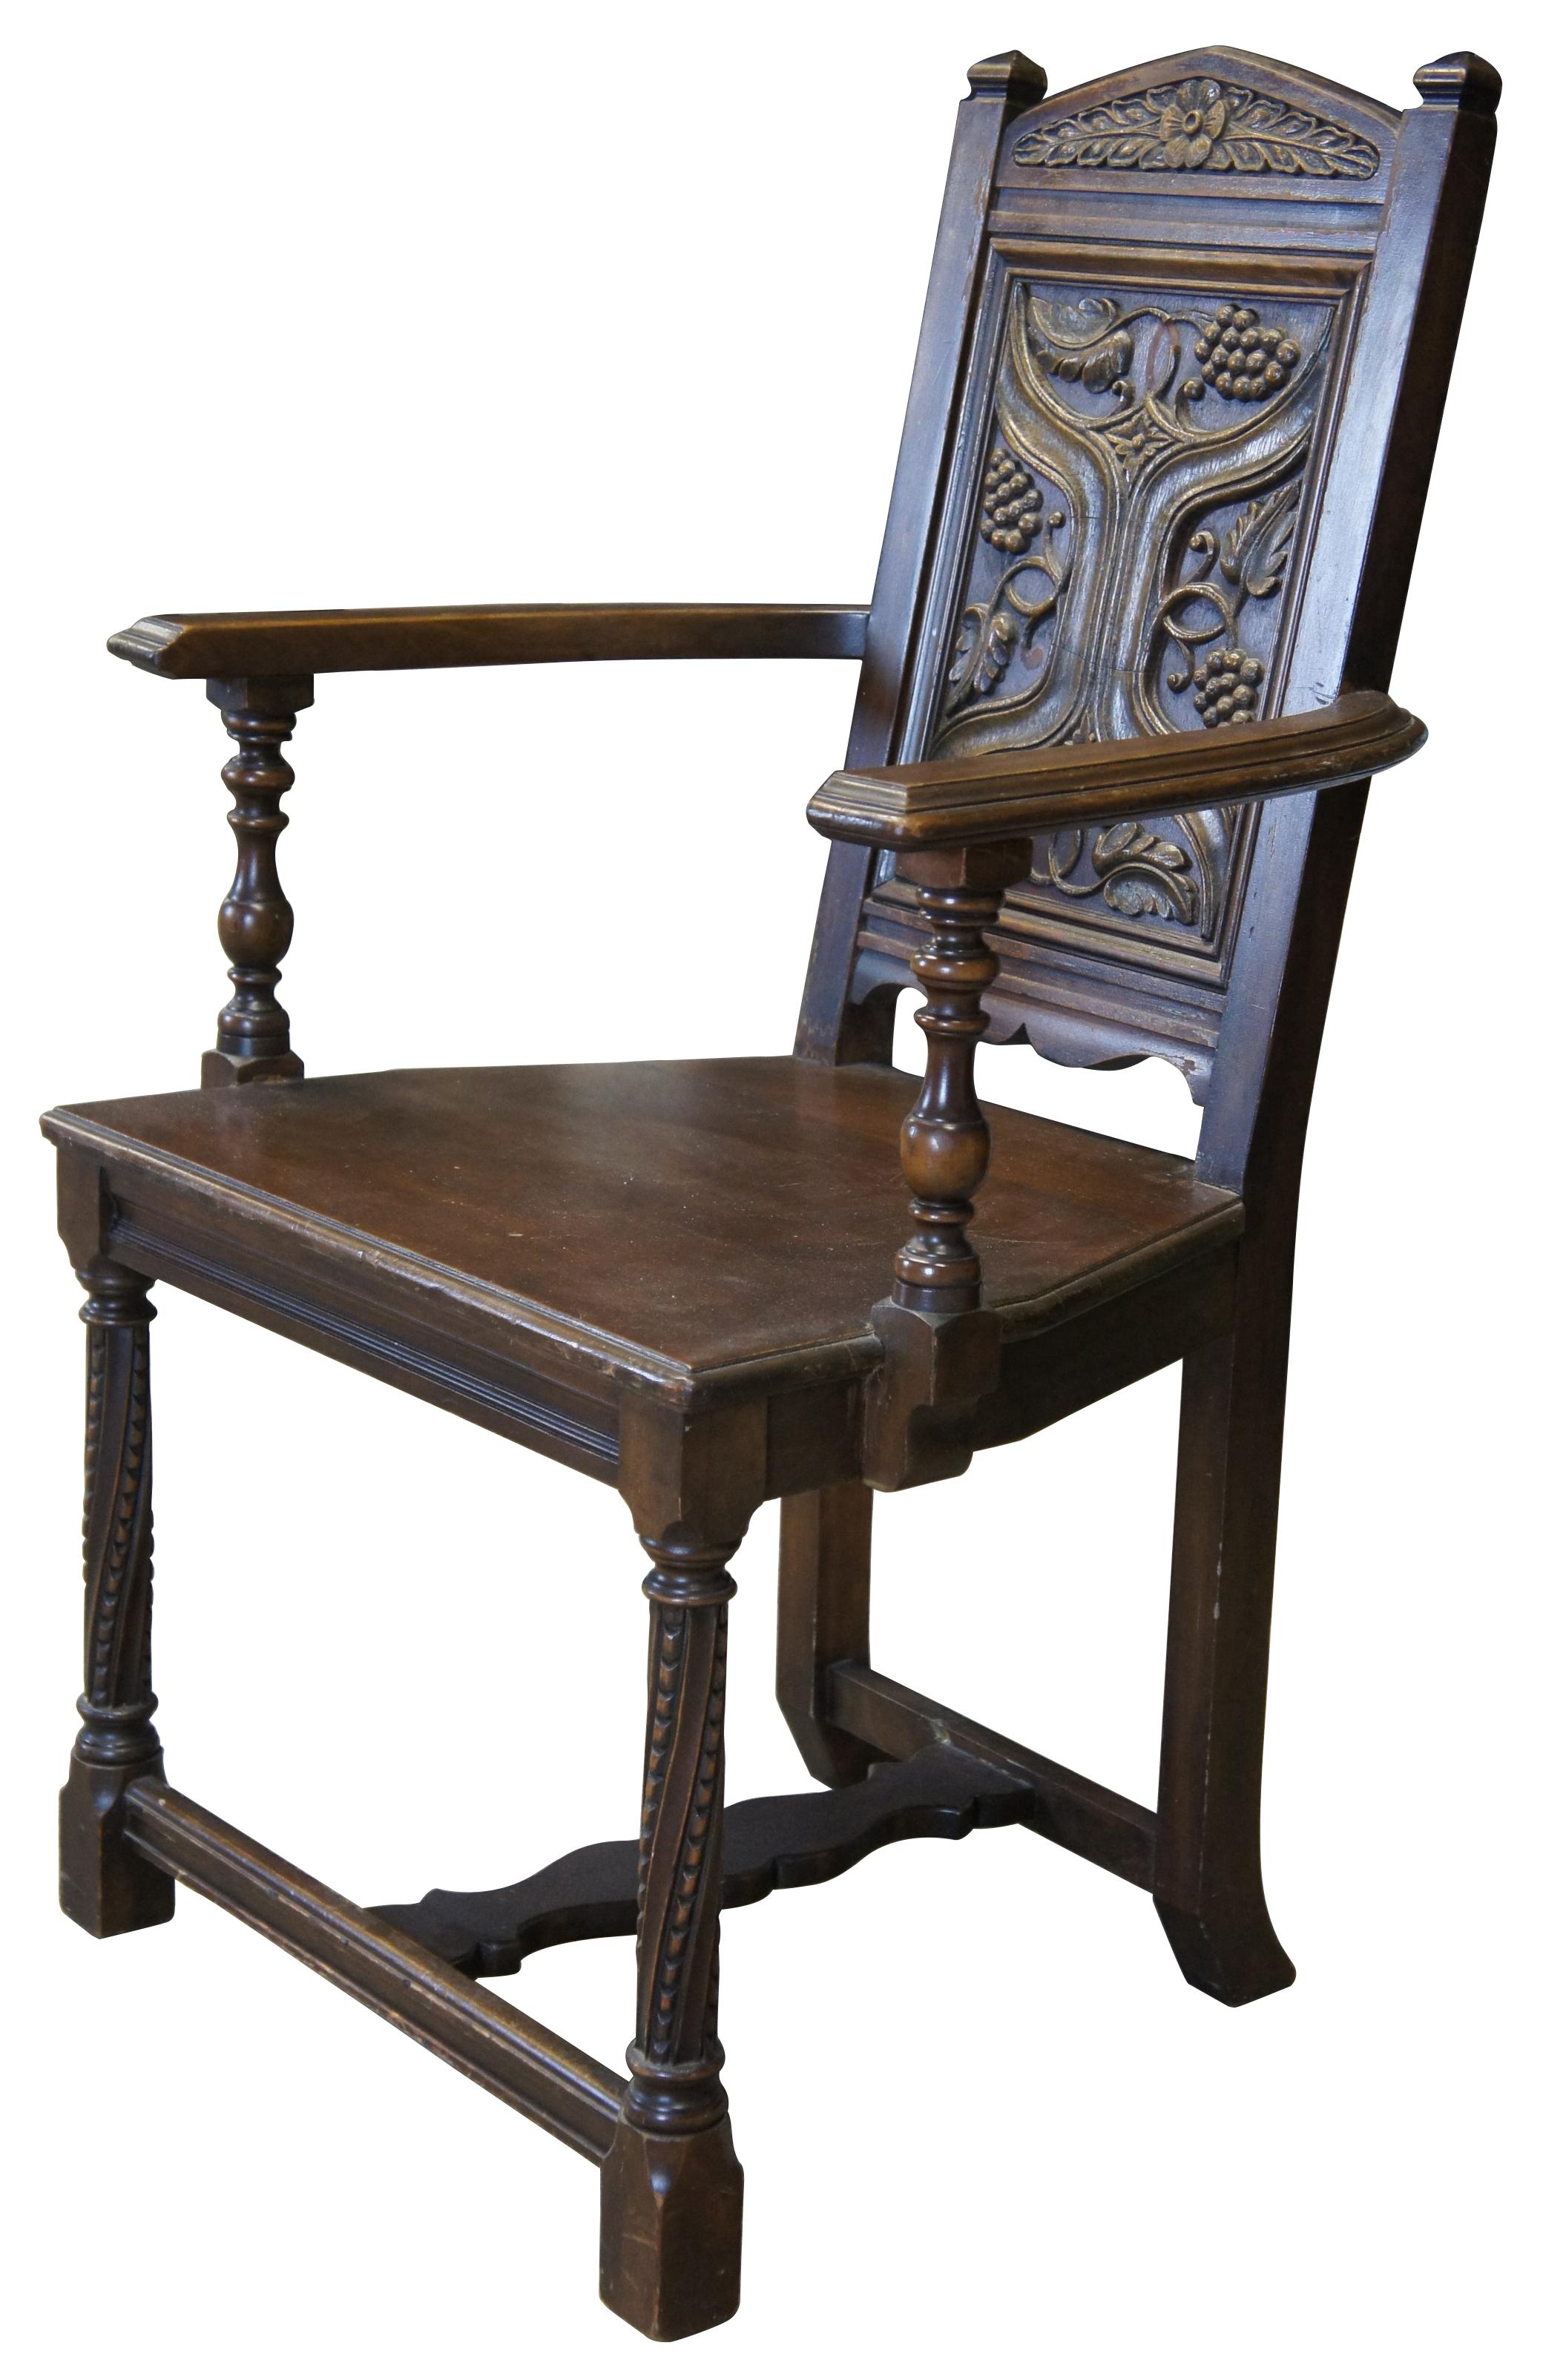 American Furniture Company Gothic or Spanish Renaissance Revival armchair. Operating out of Batesville Indiana since 1899, they worked closely and collaborated in part with Romweber. Specializing in high grade bedroom suites and furniture. Made from